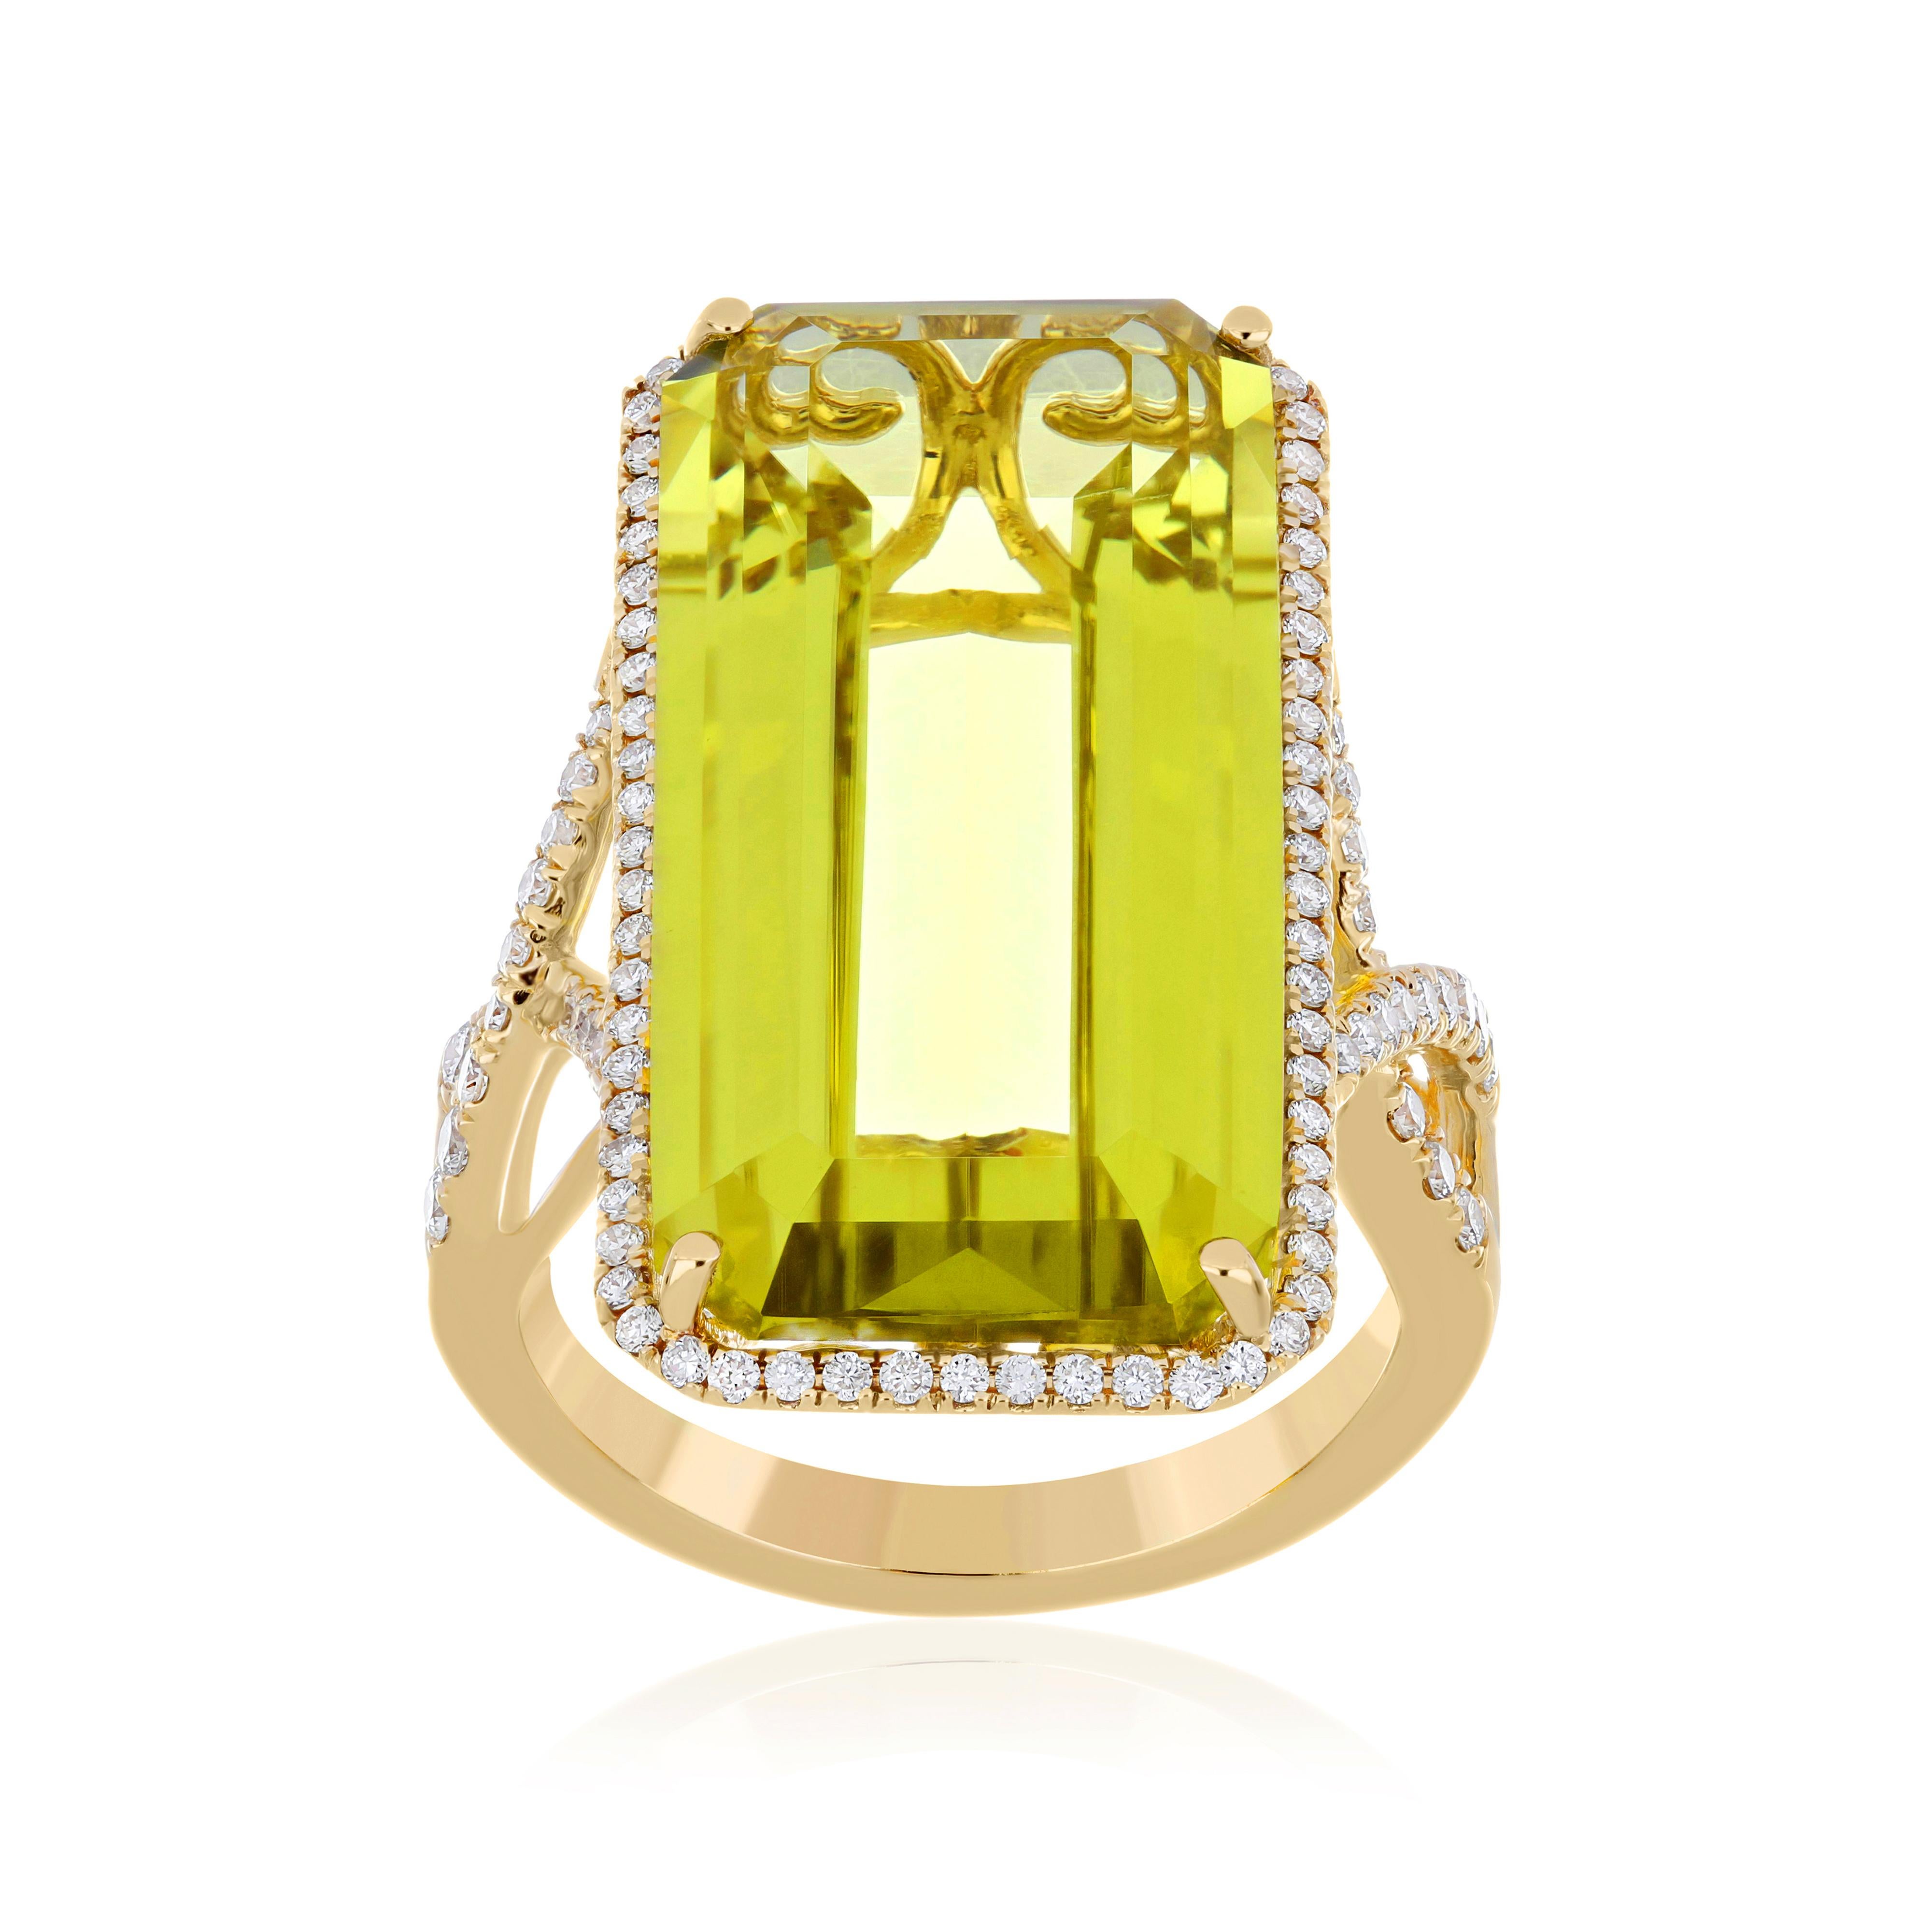 For Sale:  18.35cts Lemon Citrine and Diamond 14 Karat Yellow Gold Ring for New Year Gift  2